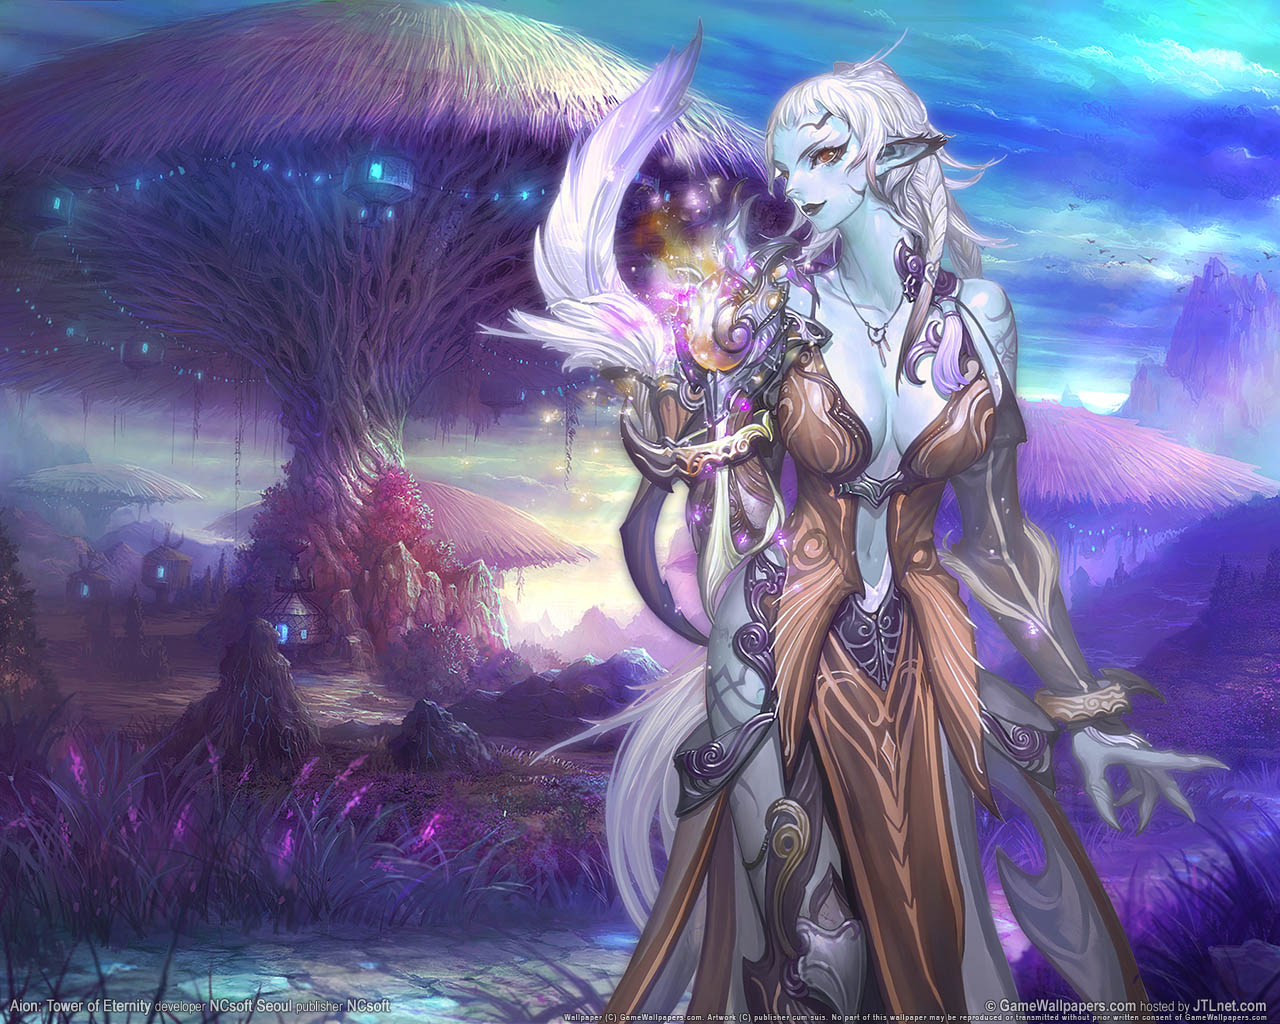 Aion%3A Tower of Eternity achtergrond 10 1280x1024